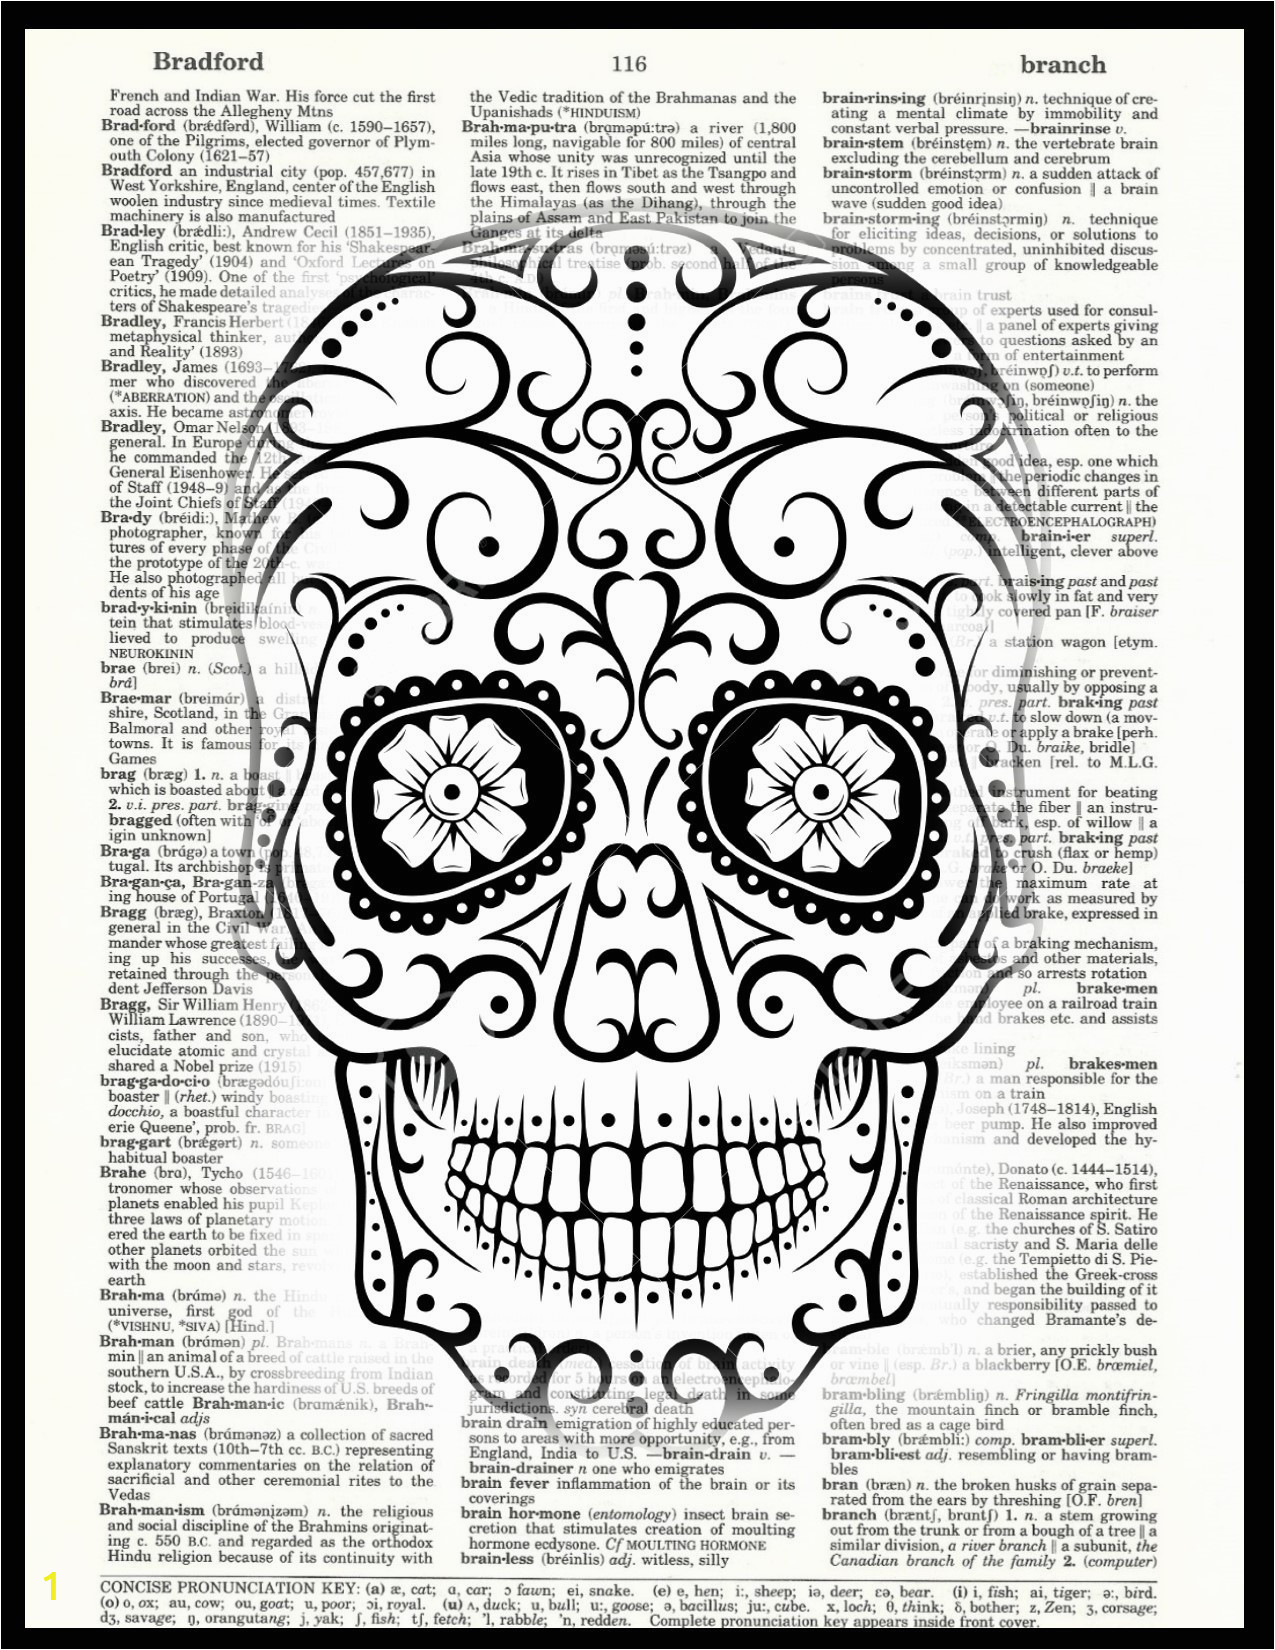 printablegar skull coloring pages for kids female book page buffalo template free design printable sugar arts anatomy unique best s dia los muertos day of the colouring